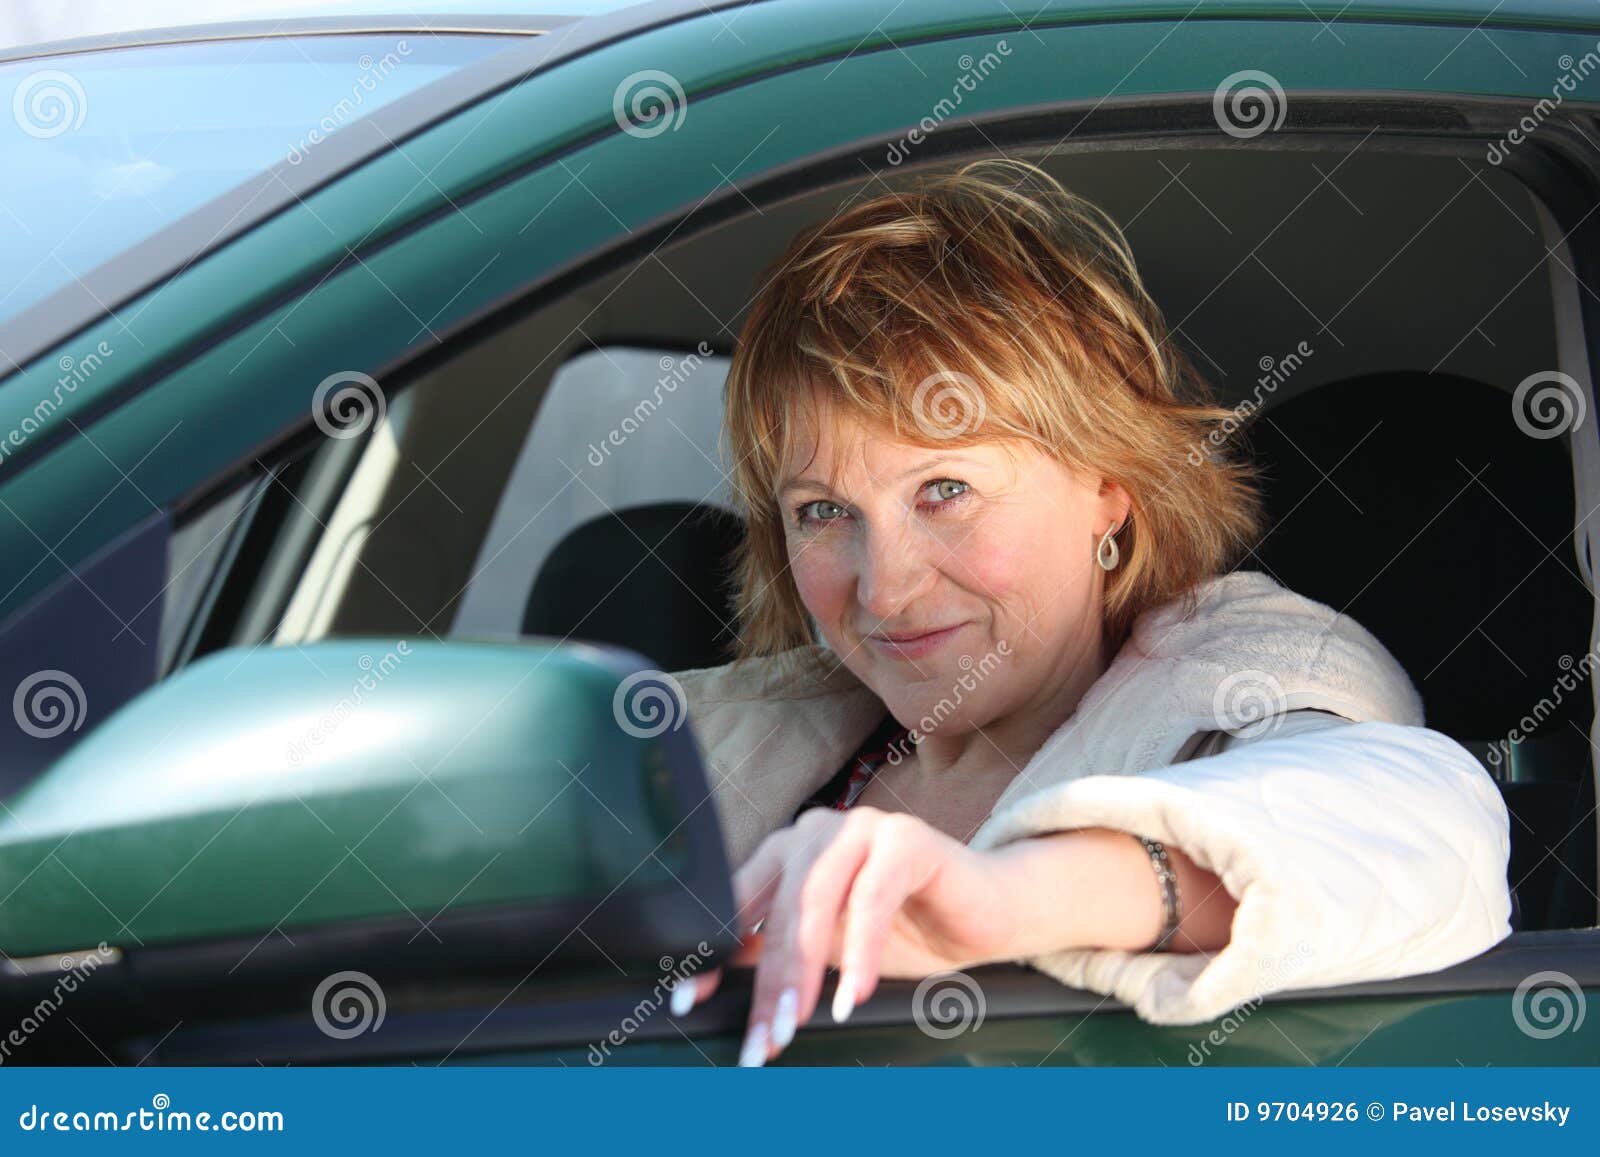 middleaged woman in car